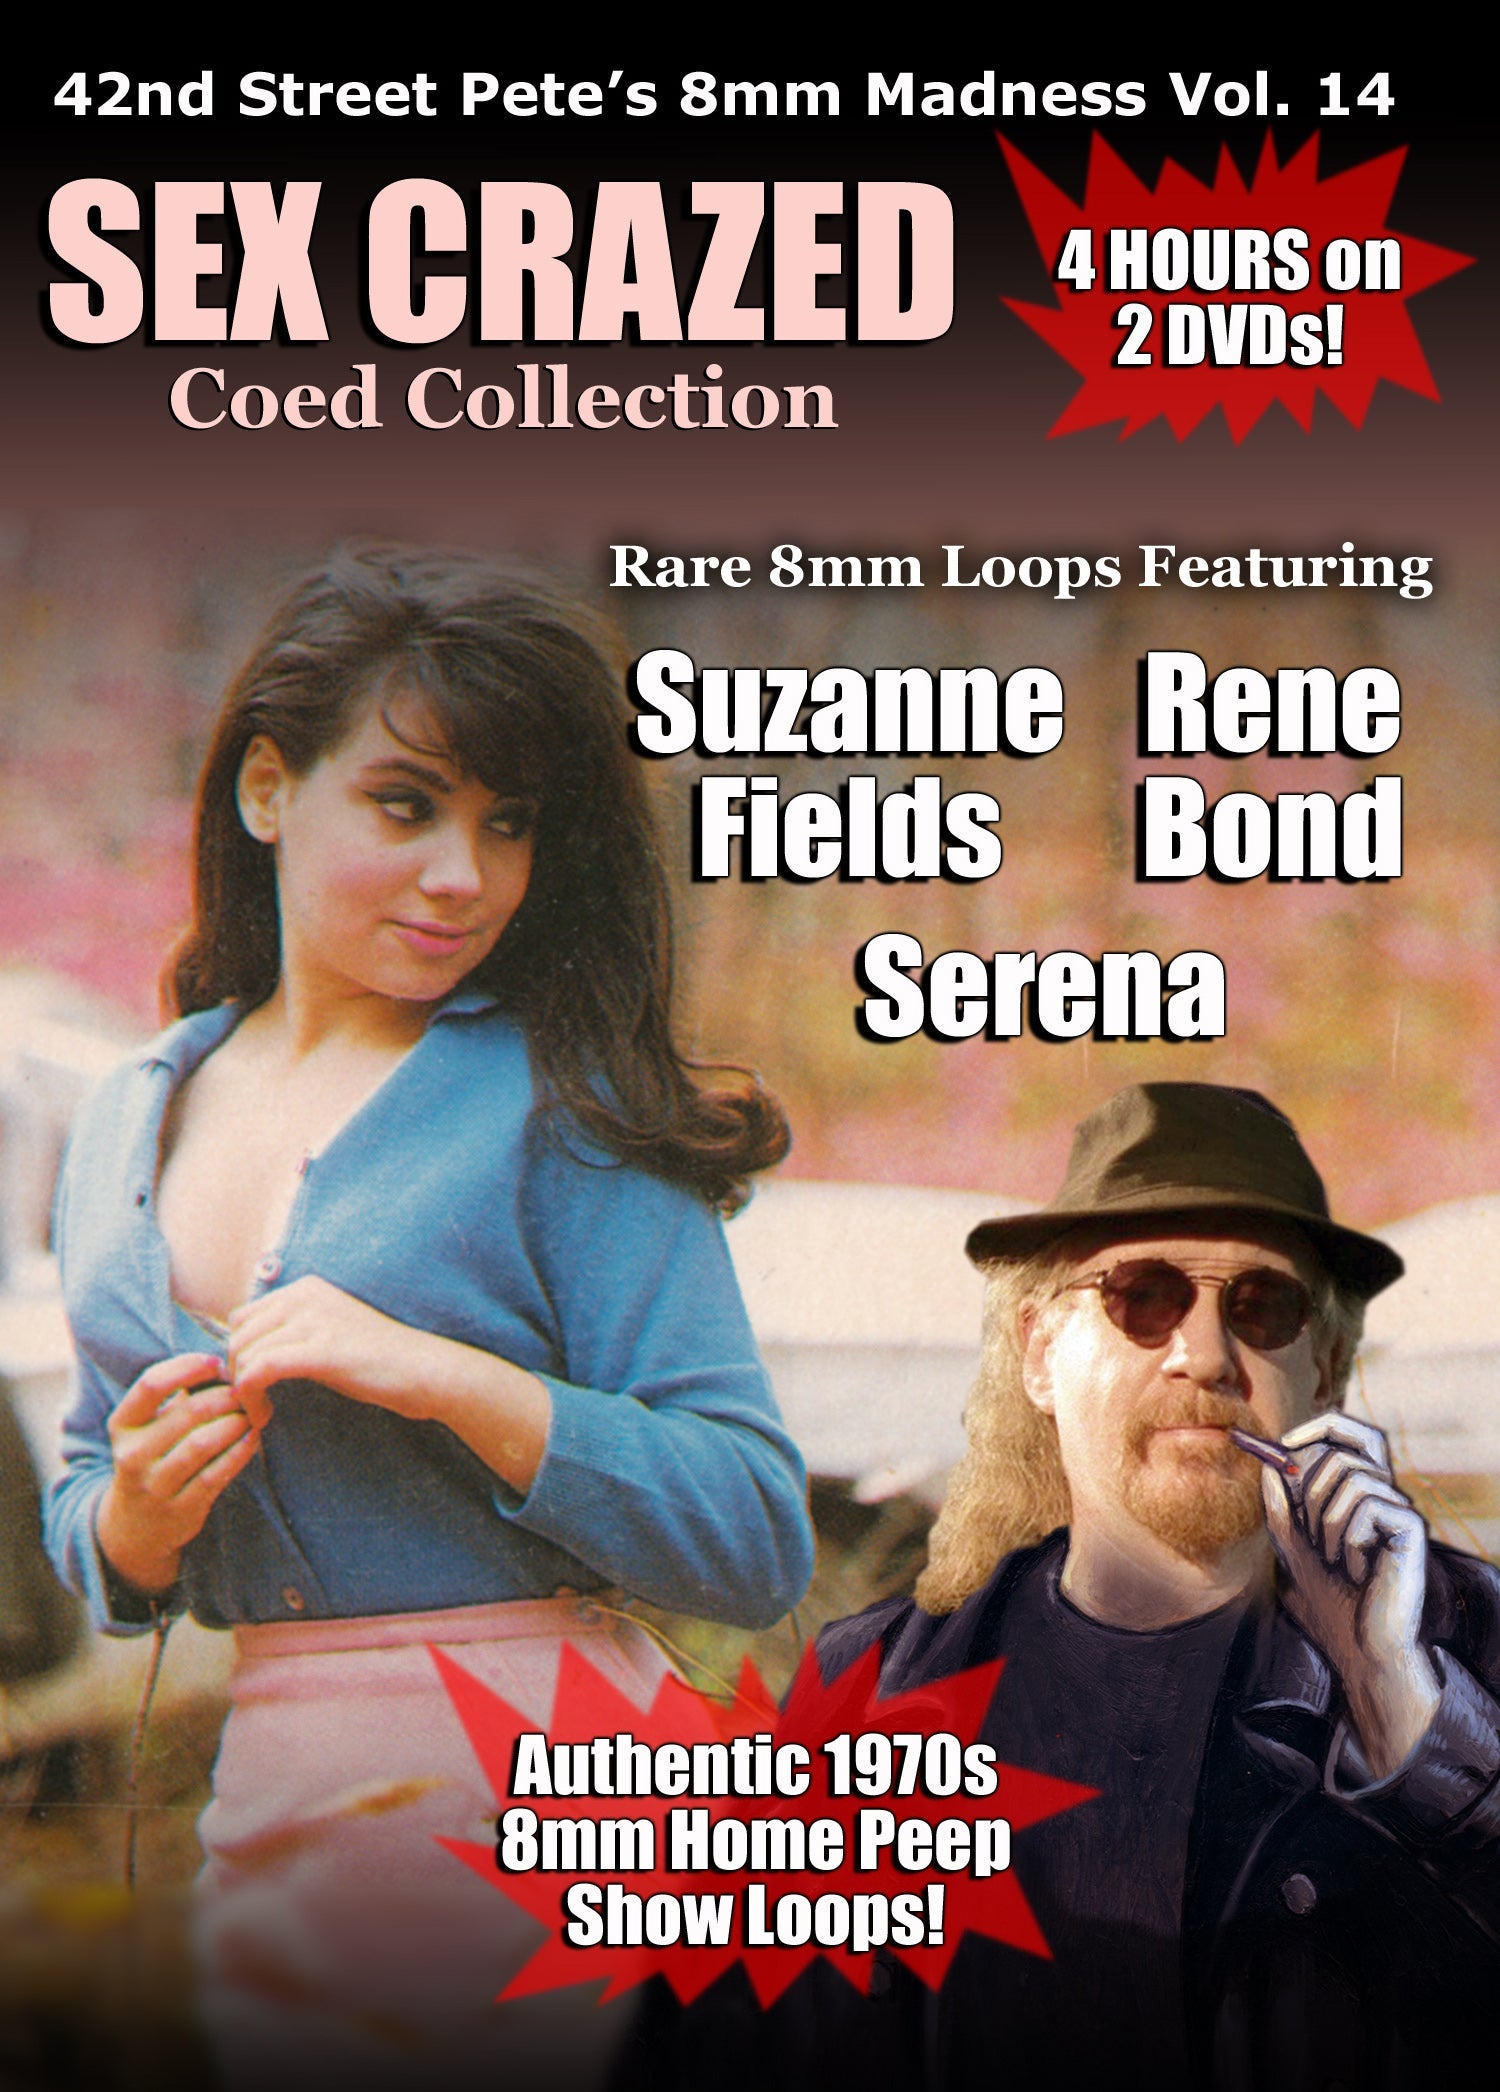 42ND STREET PETE'S SEX CRAZED COED COLLECTION DVD